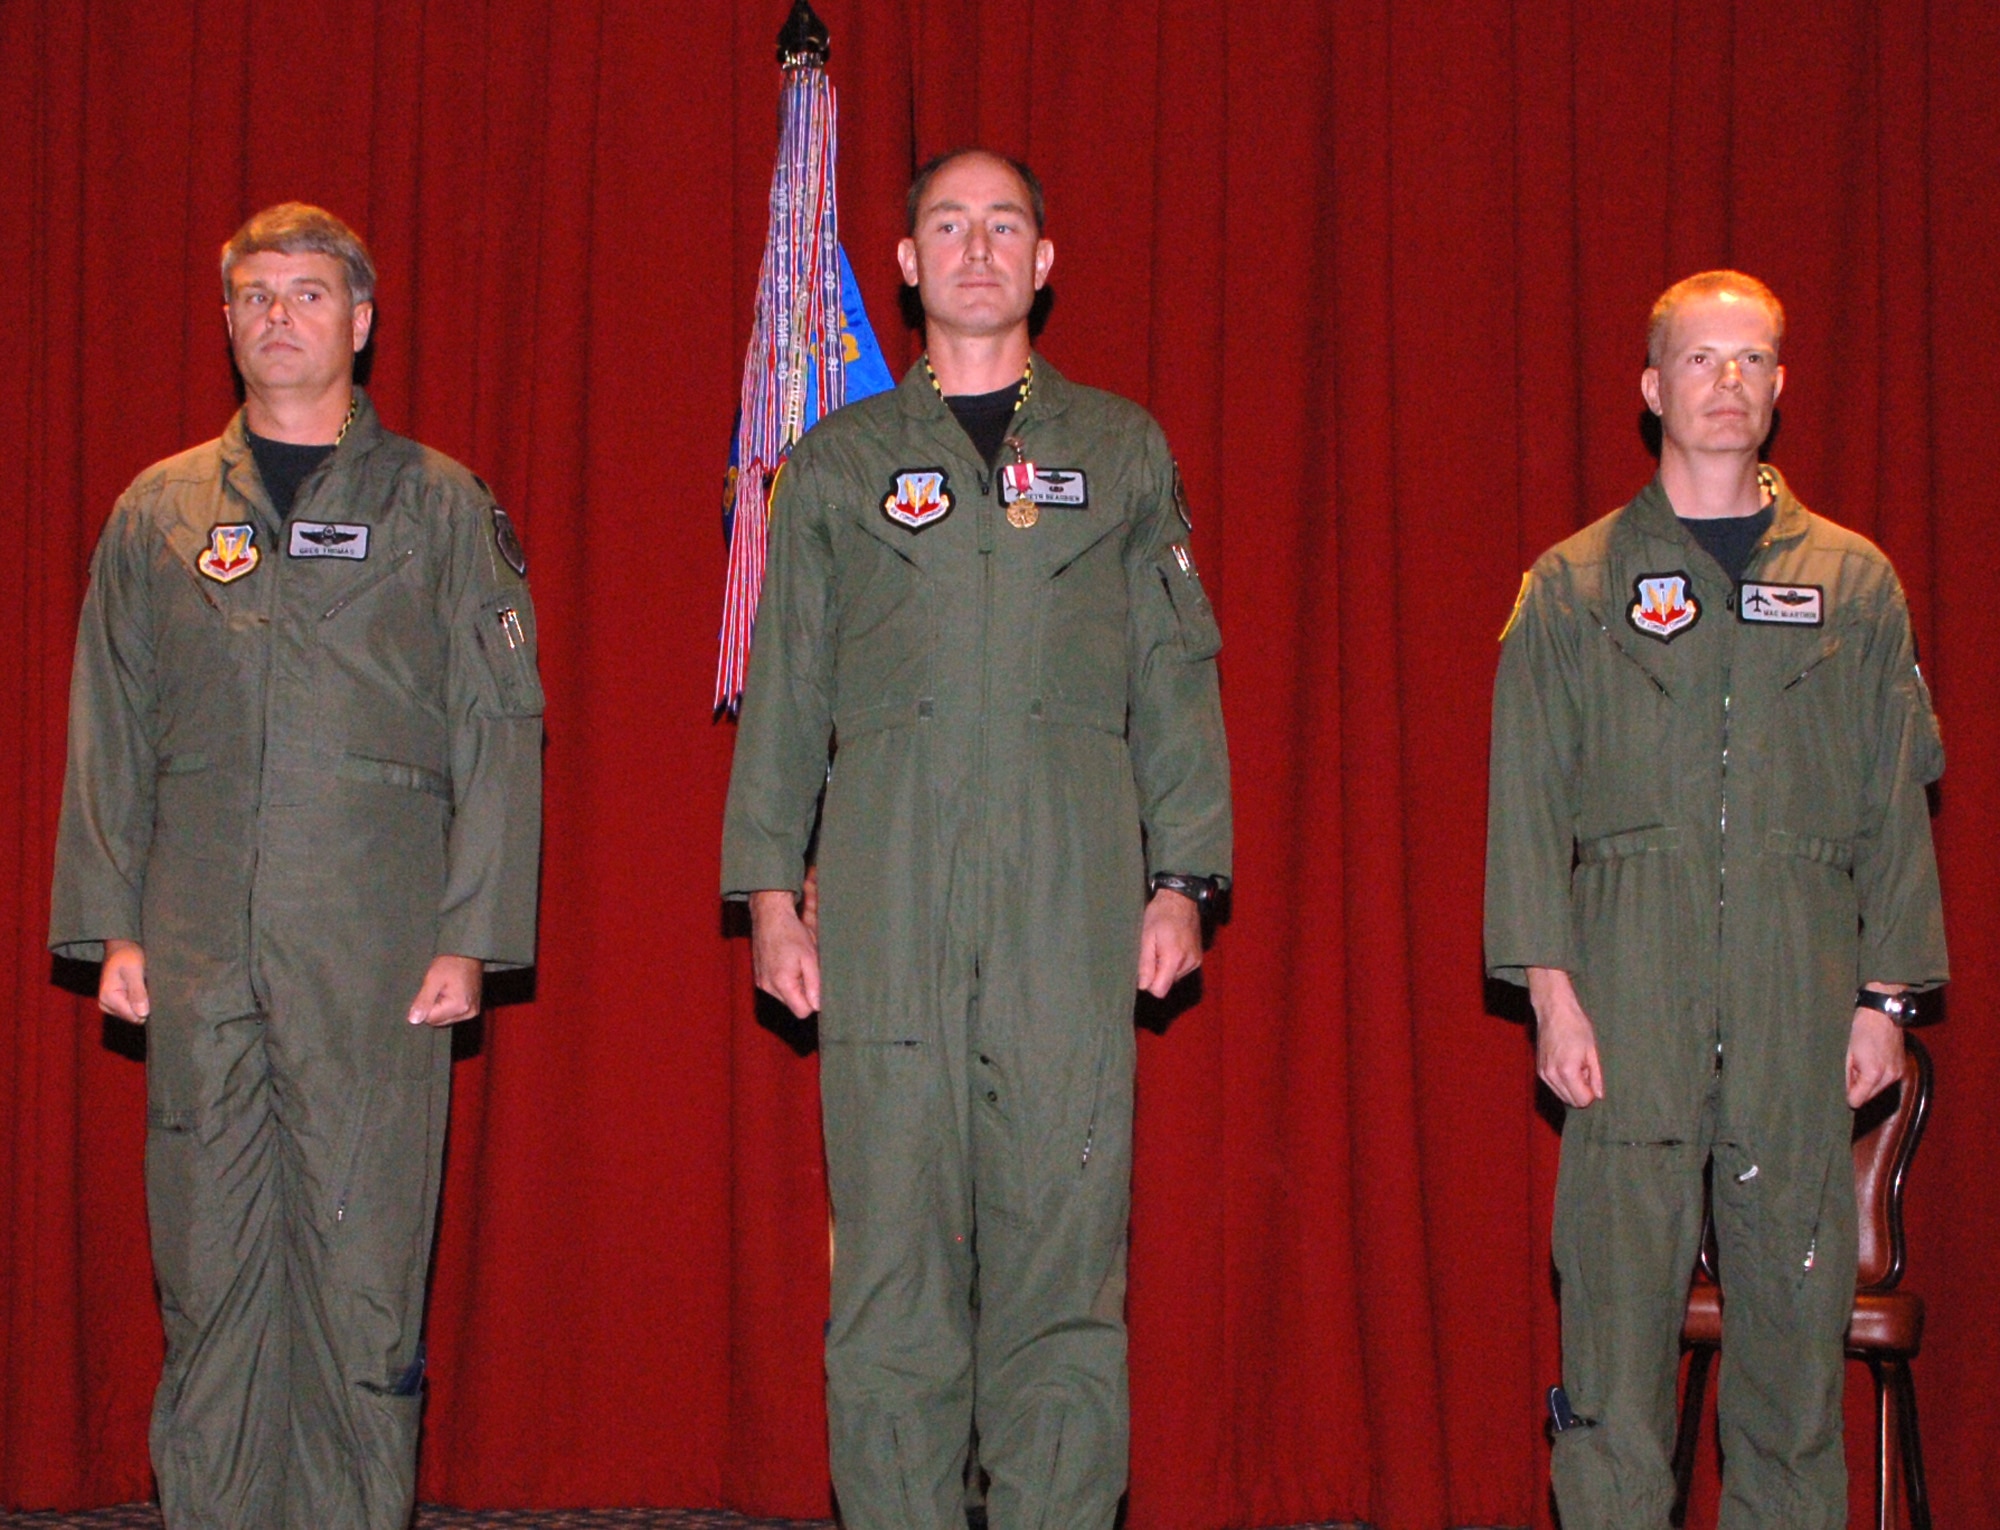 FAIRCHILD AIR FORCE BASE, Wash. – From left, Lt. Col. Gregory Thomas, USAF Weapons School Commandant; Lt. Col. Seth Beaubien, former 509th Weapons Squadron commander; and Lt. Col. Howard McArthur, 509th commander, prepare to pass the guide-on during the 509th WPS change of command ceremony here June 22. (U.S. Air Force photo/Airman 1st Class Joshua Chapman)